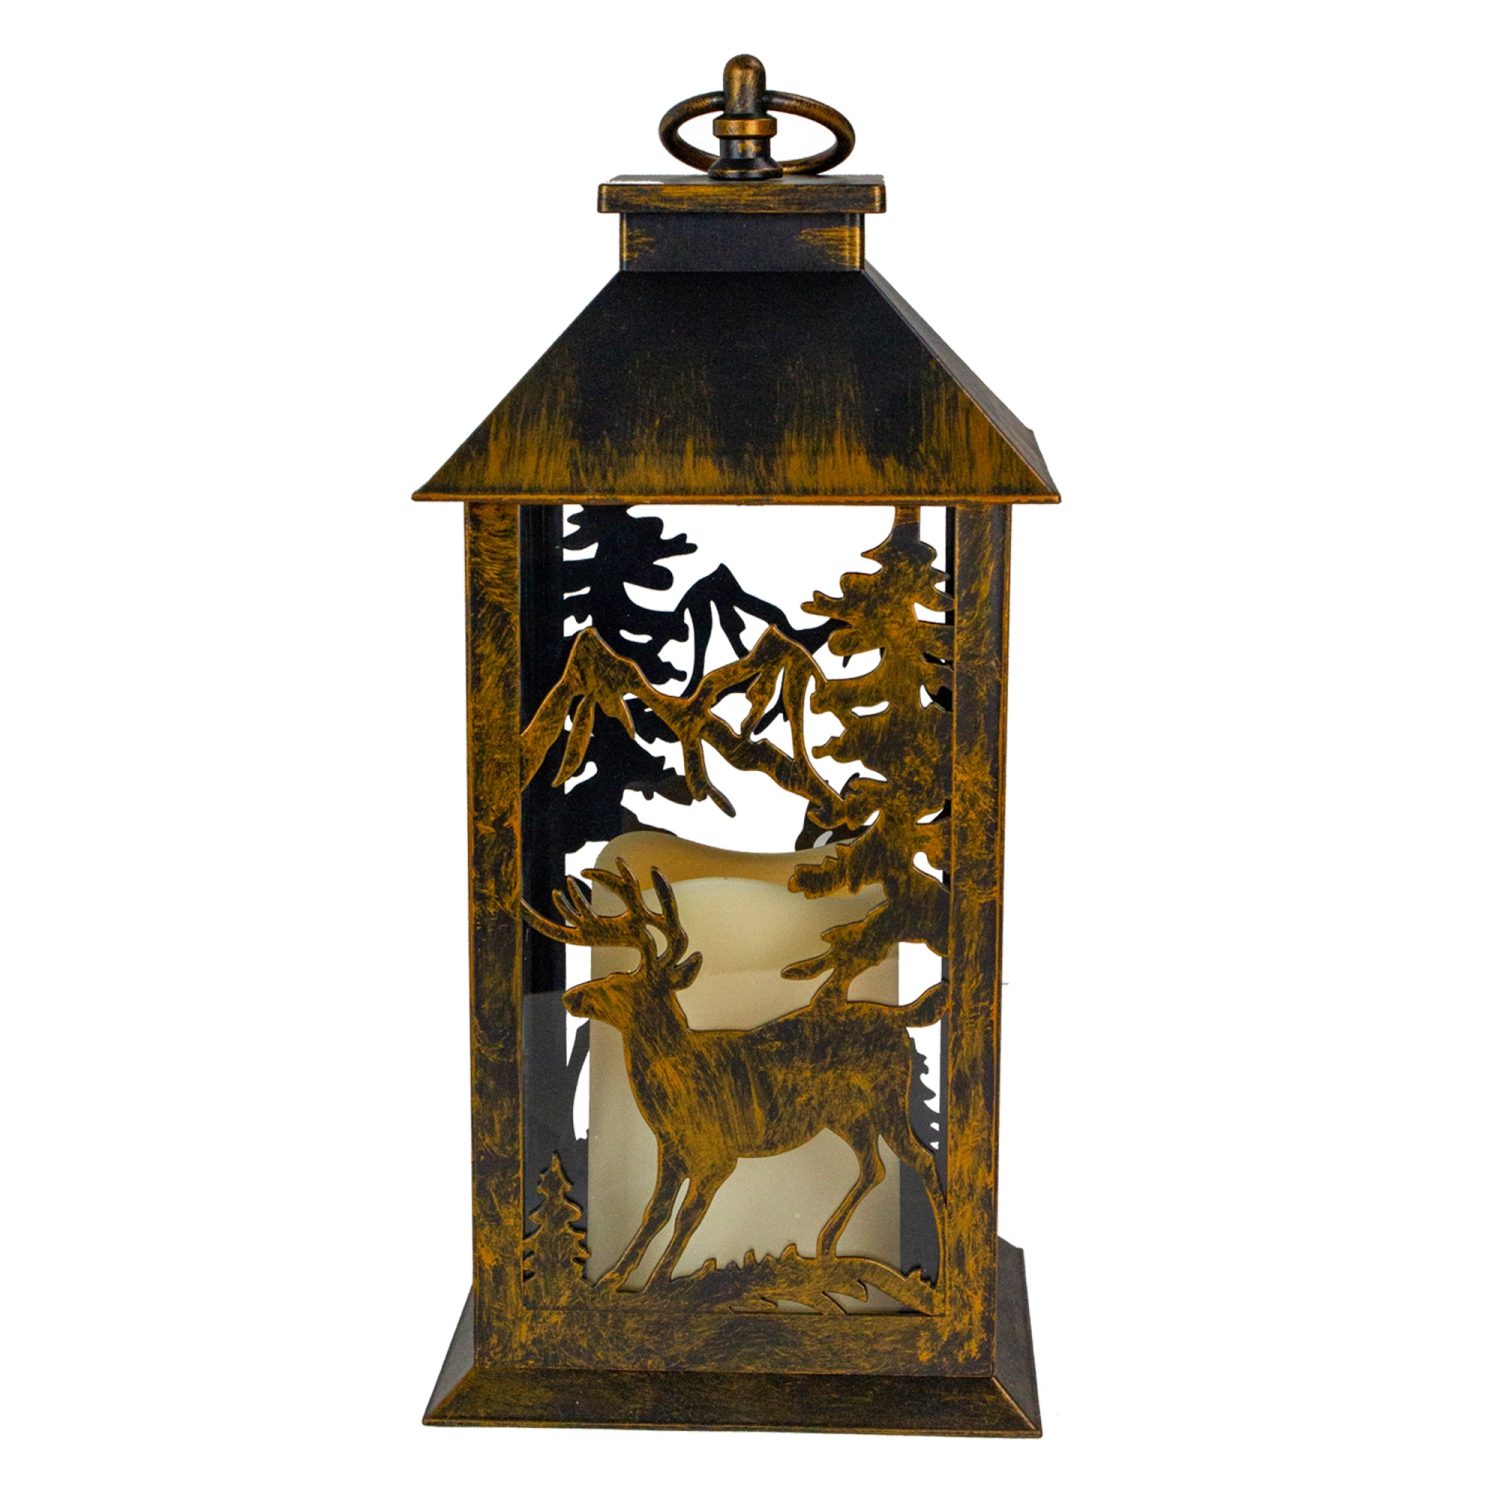 13.5" Deer and Tree Christmas Lantern with Flameless LED Candle